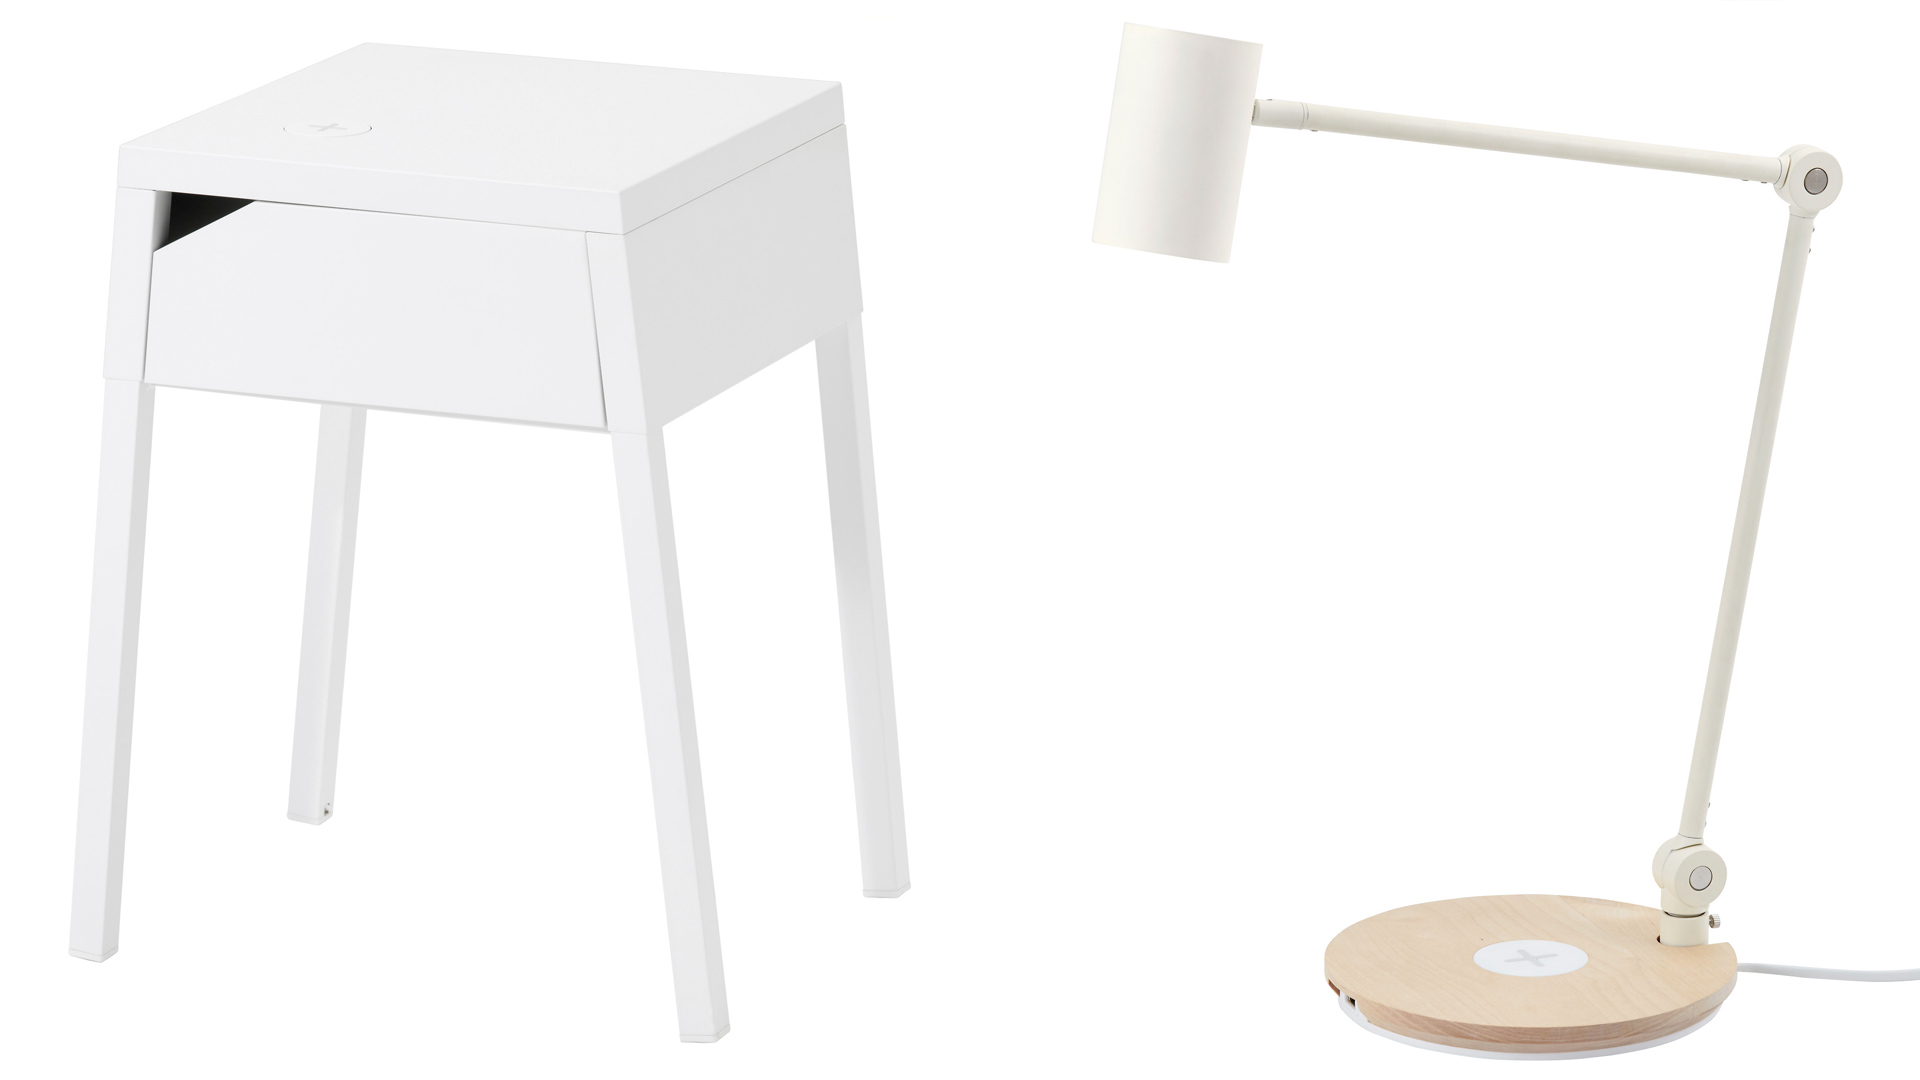 IKEA makes a range of wireless charging pads, some built into furniture